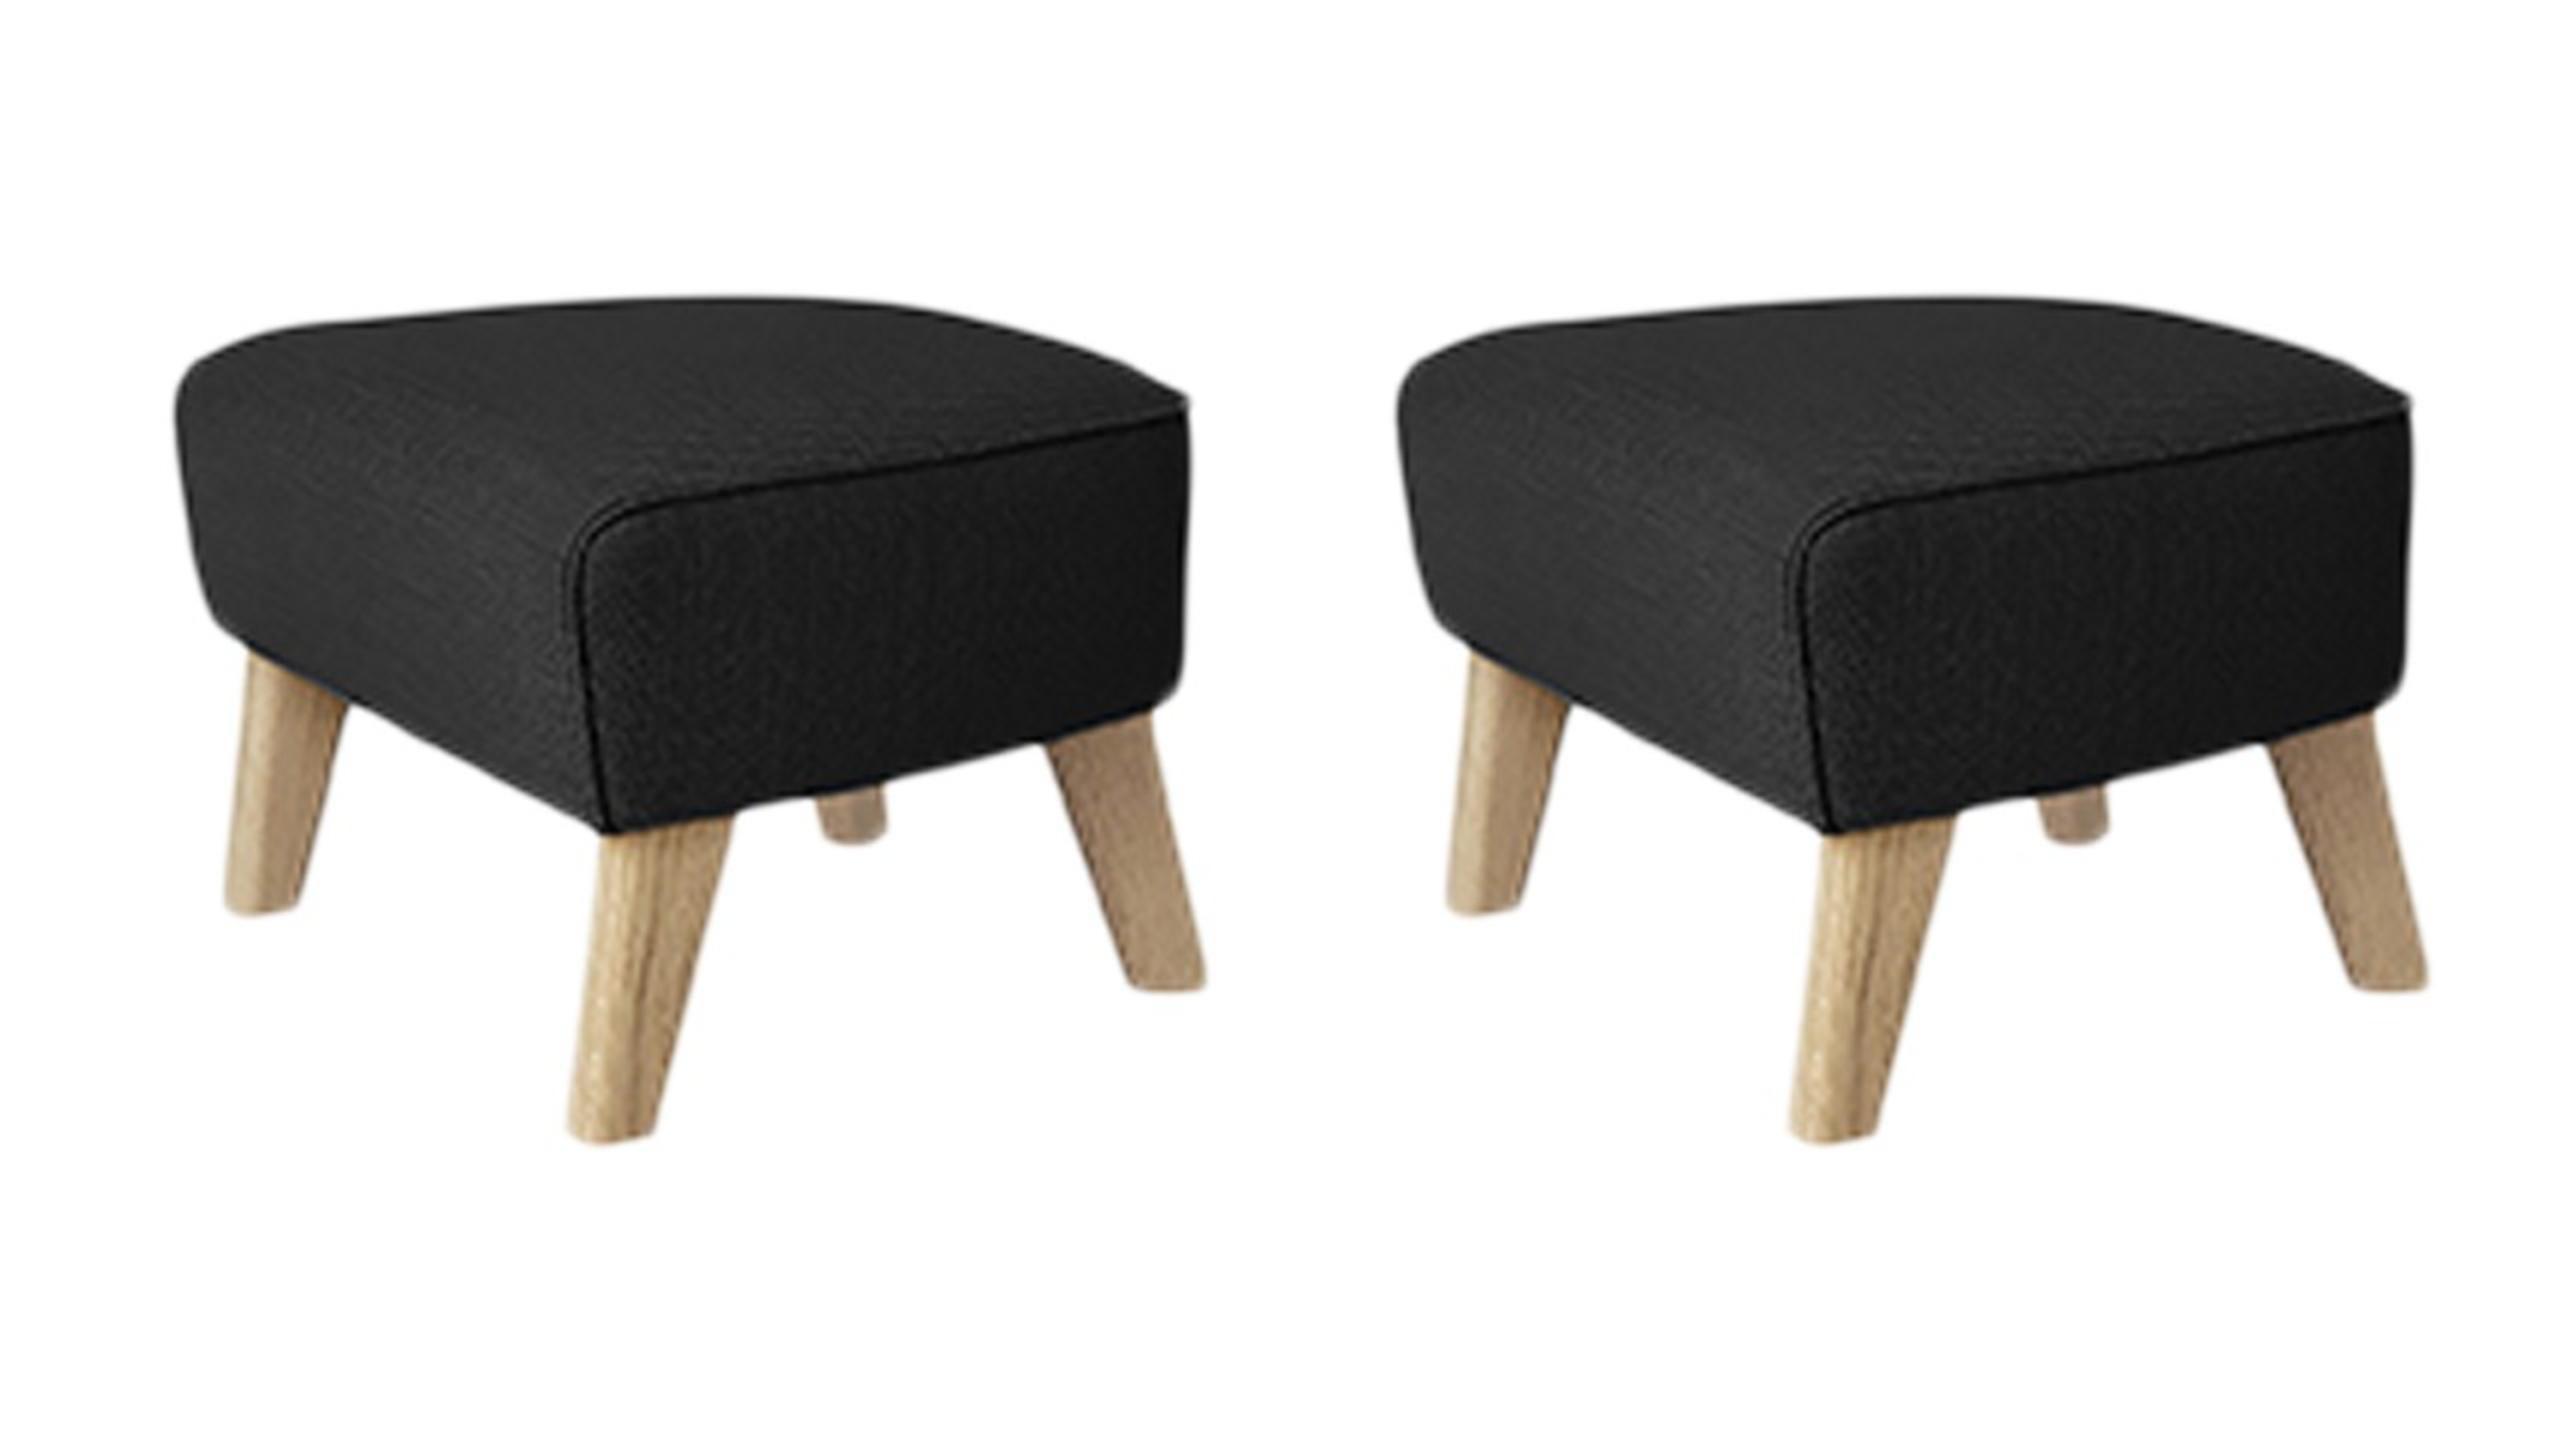 Set of 2 dark grey, natural oak RafSimonsVidar3 My Own Chair Footstool by Lassen
Dimensions: W 56 x D 58 x H 40 cm 
Materials: textile, oak.
Also available: other colors available.

The My Own Chair Footstool has been designed in the same